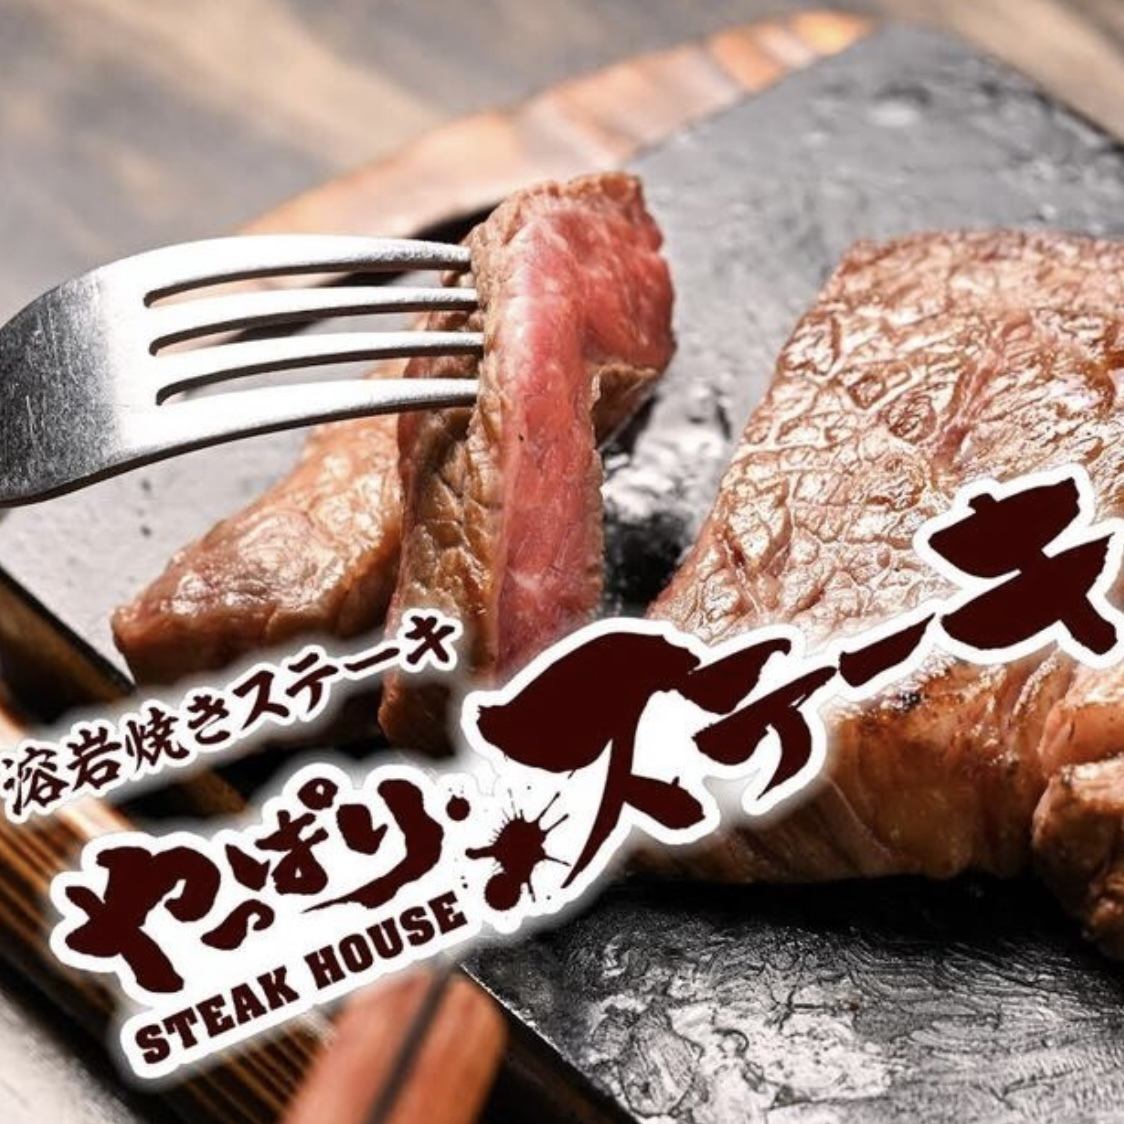 After all, steaks that are particular about the deliciousness and fun of steaks are now available in Kanda!